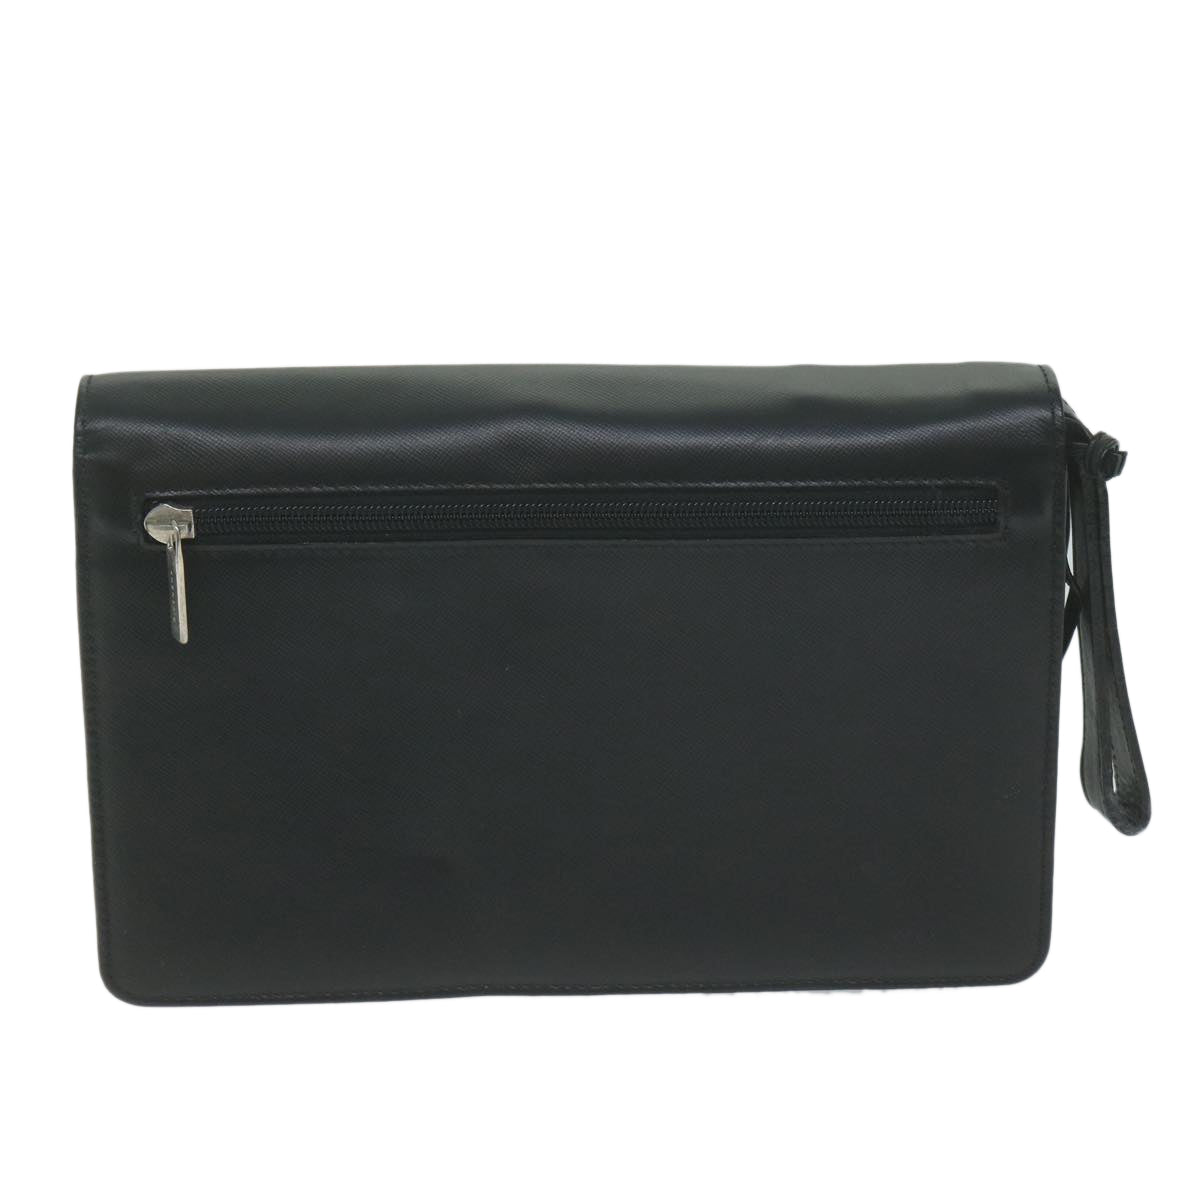 GIVENCHY Clutch Bag Leather Black Auth bs11875 - 0